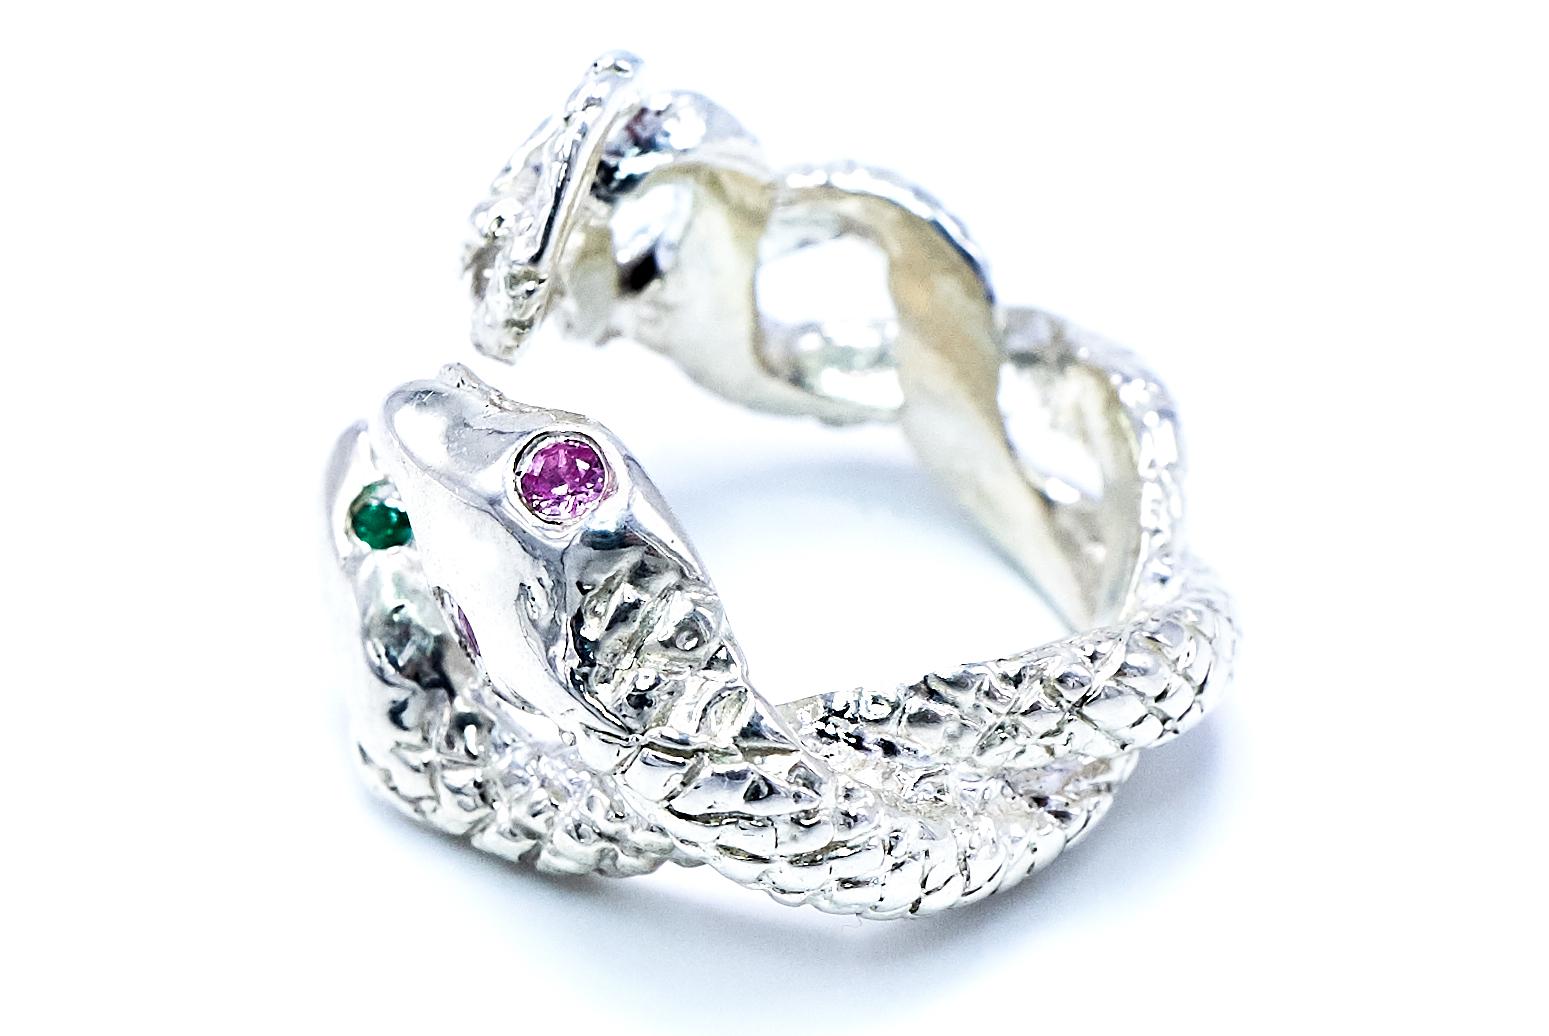 Emerald Pink Sapphire Silver Snake Statement Cocktail Ring J Dauphin

J DAUPHIN 